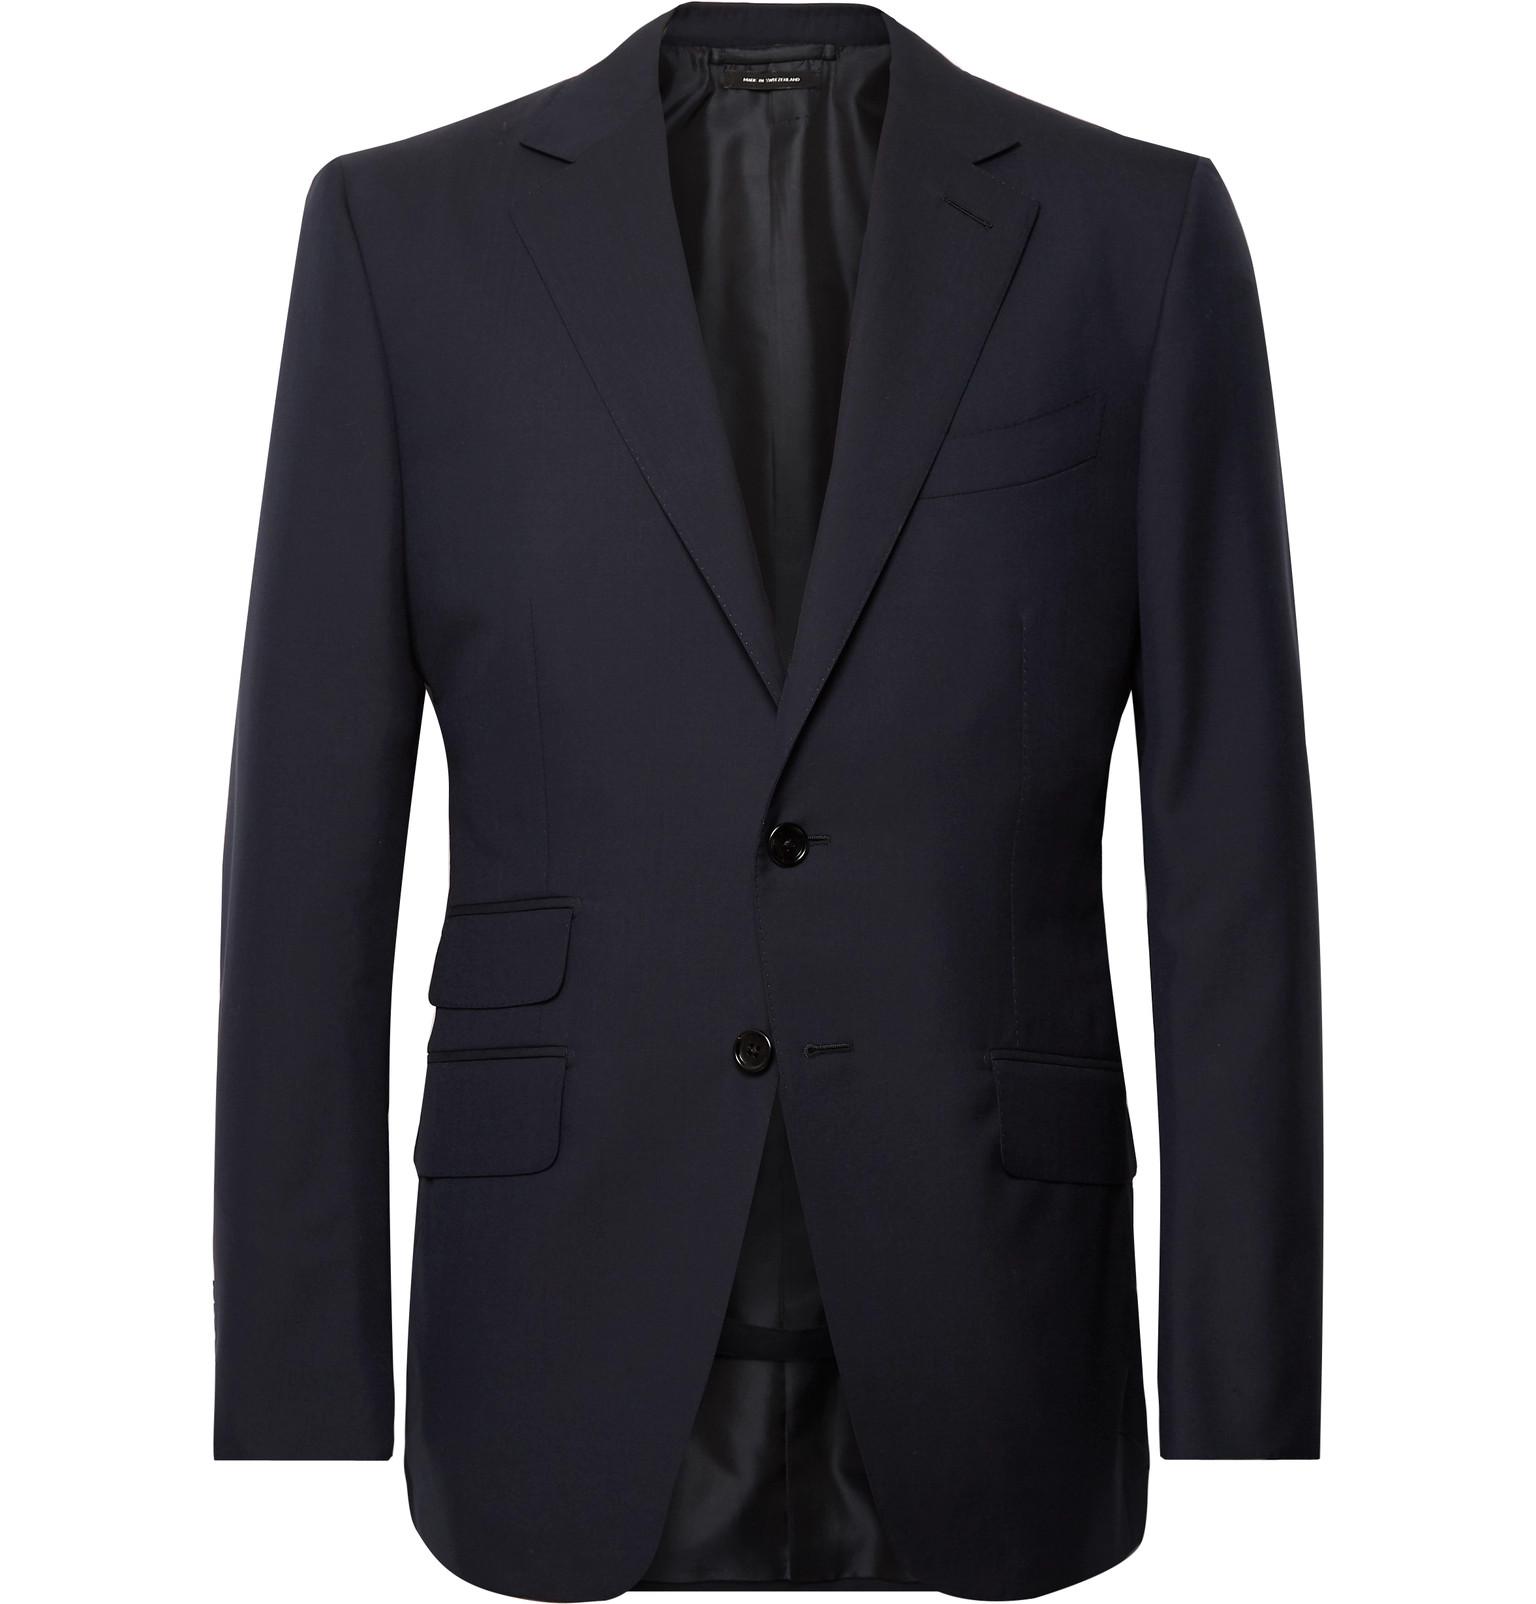 Tom Ford Navy O'connor Slim-fit Wool Suit Jacket in Blue for Men - Lyst